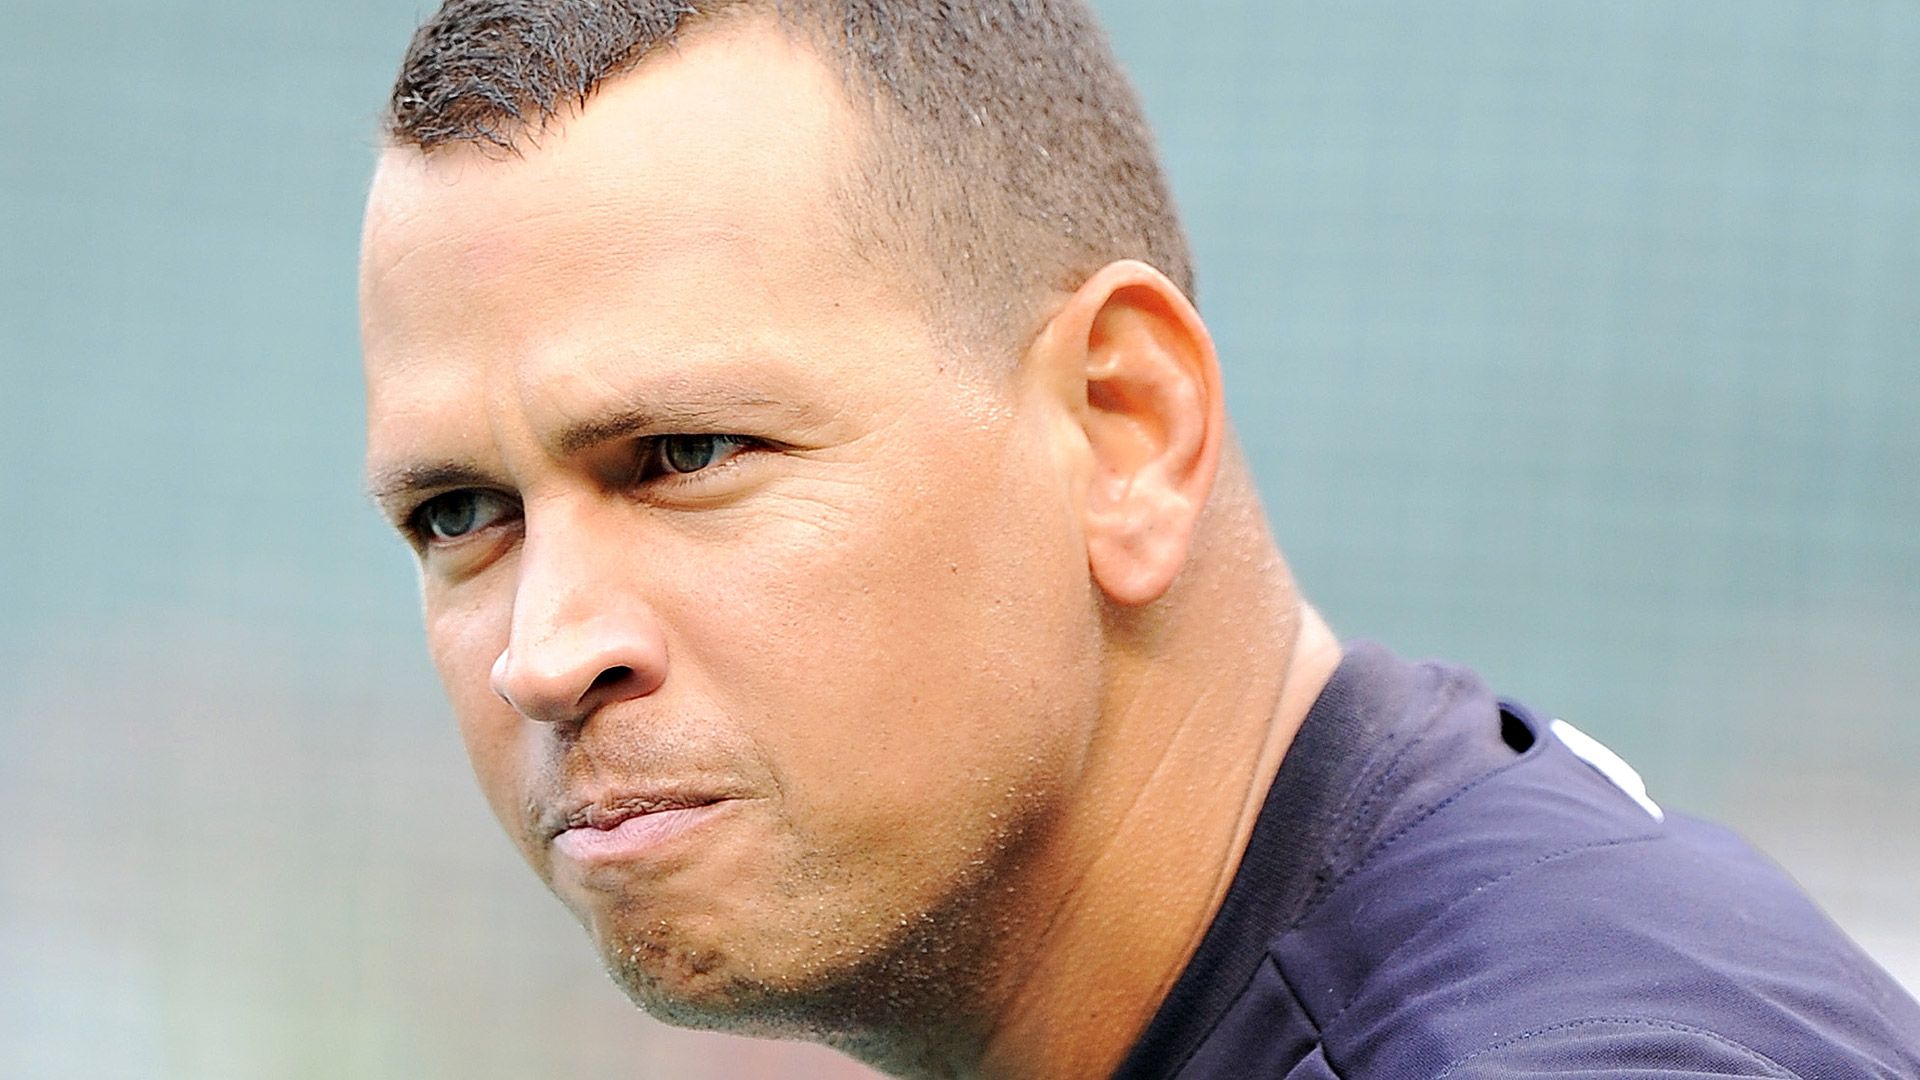 Arbitrator's Ruling Banishes the Yankees' Alex Rodriguez for a